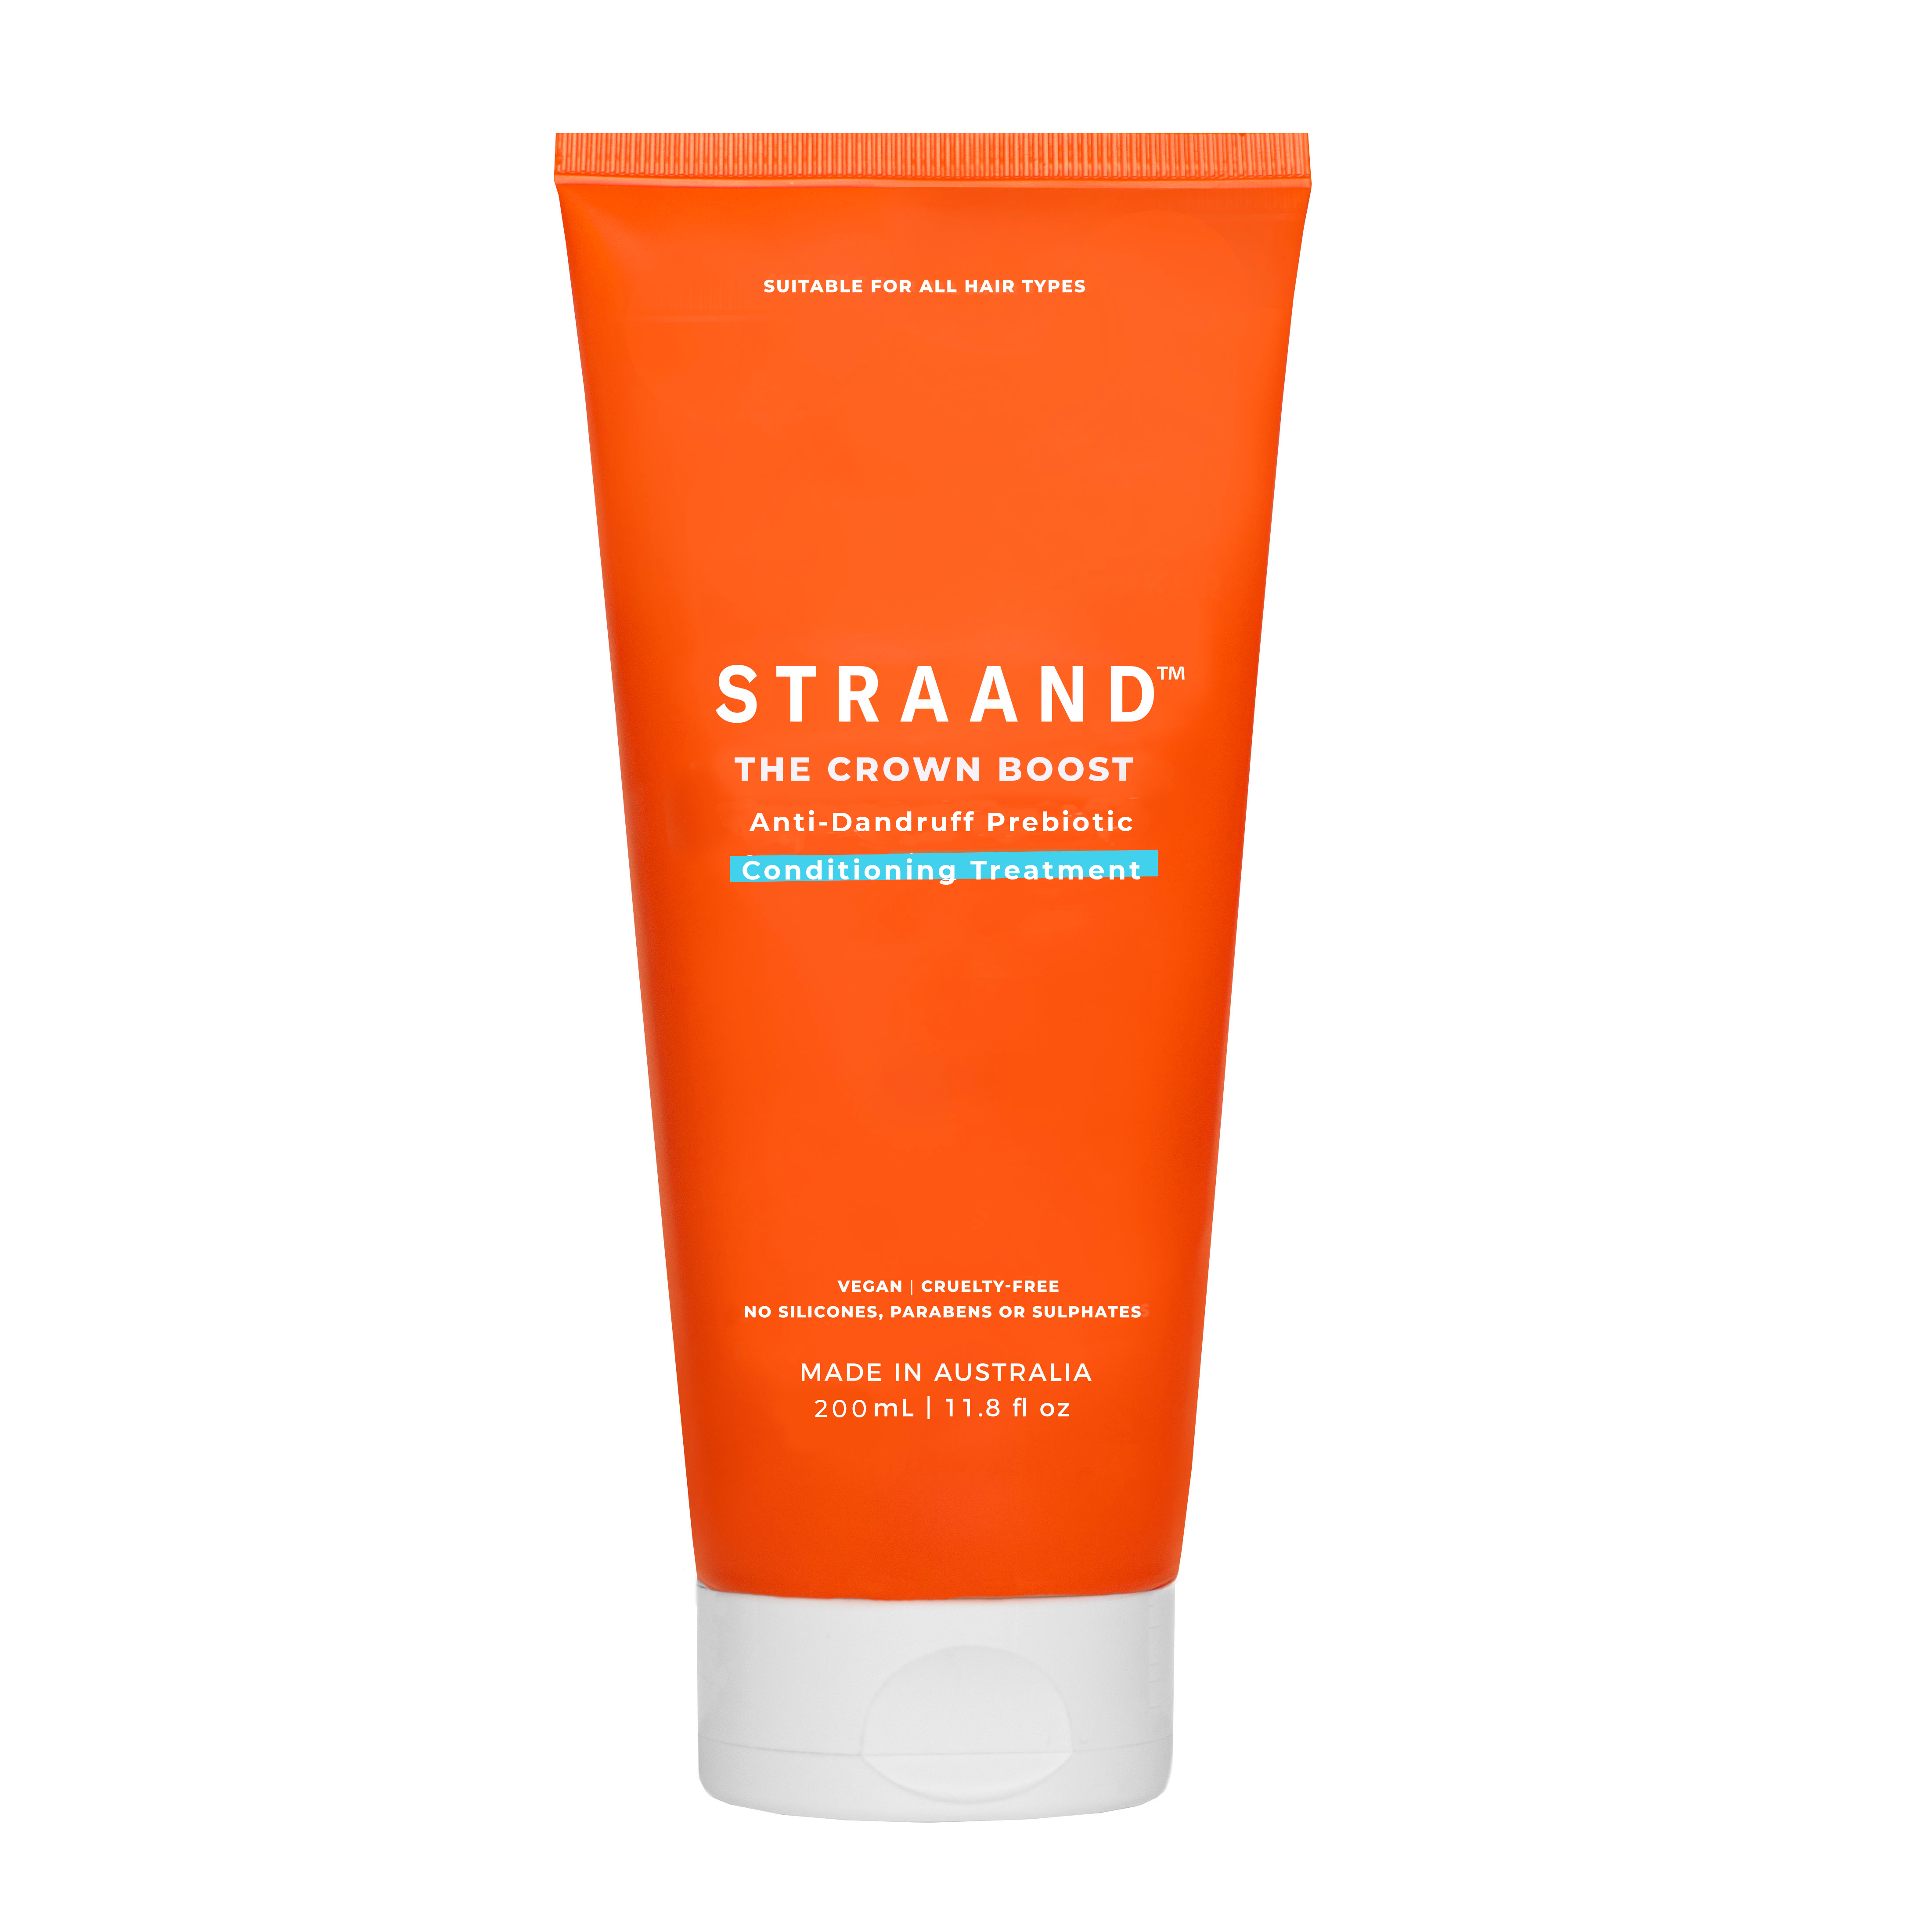 Straand Crown Boost Conditioning Treatment will help your scalp